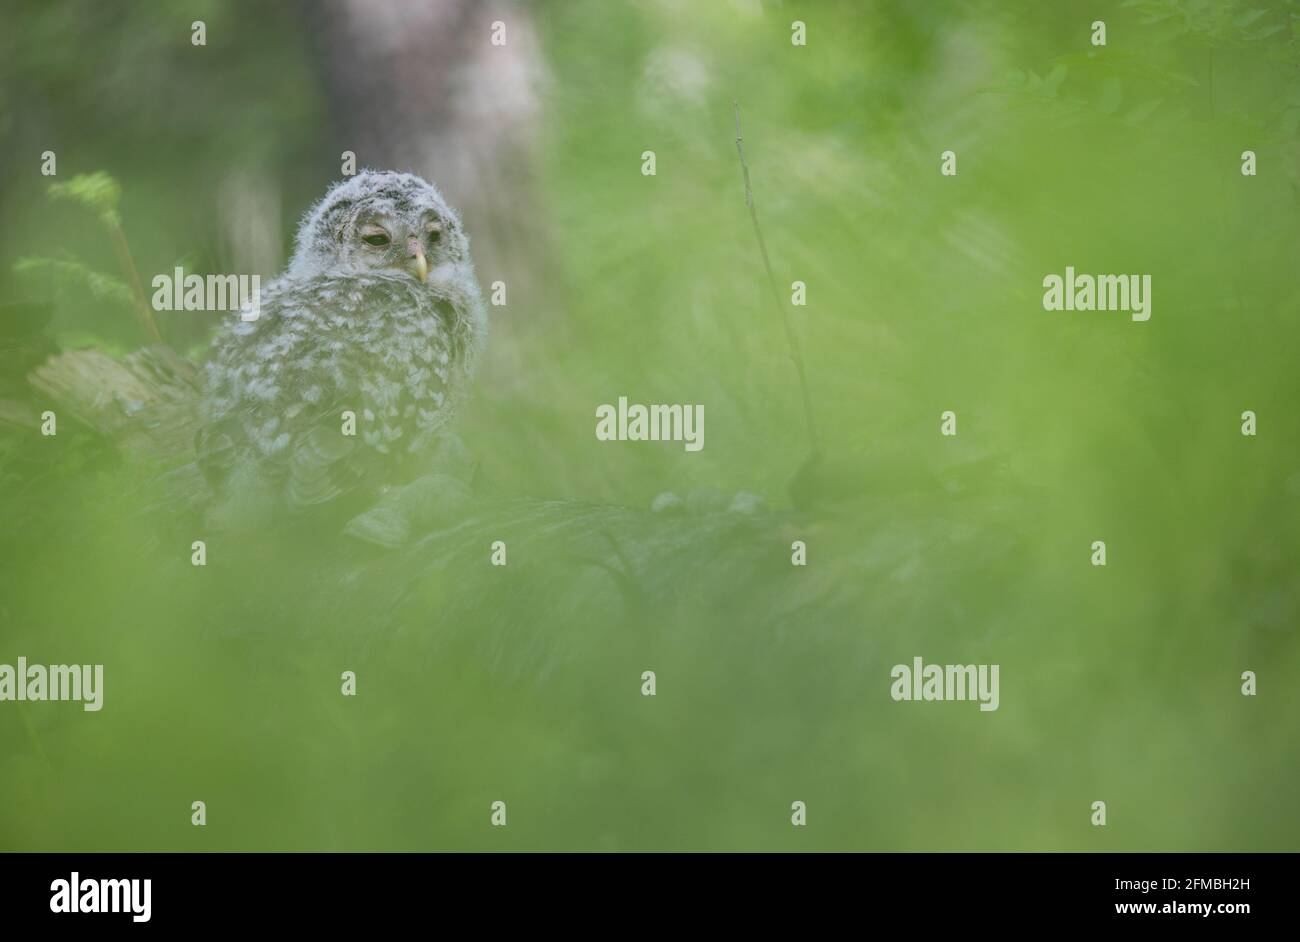 Nestling of a Ural Owl in Finland. Stock Photo